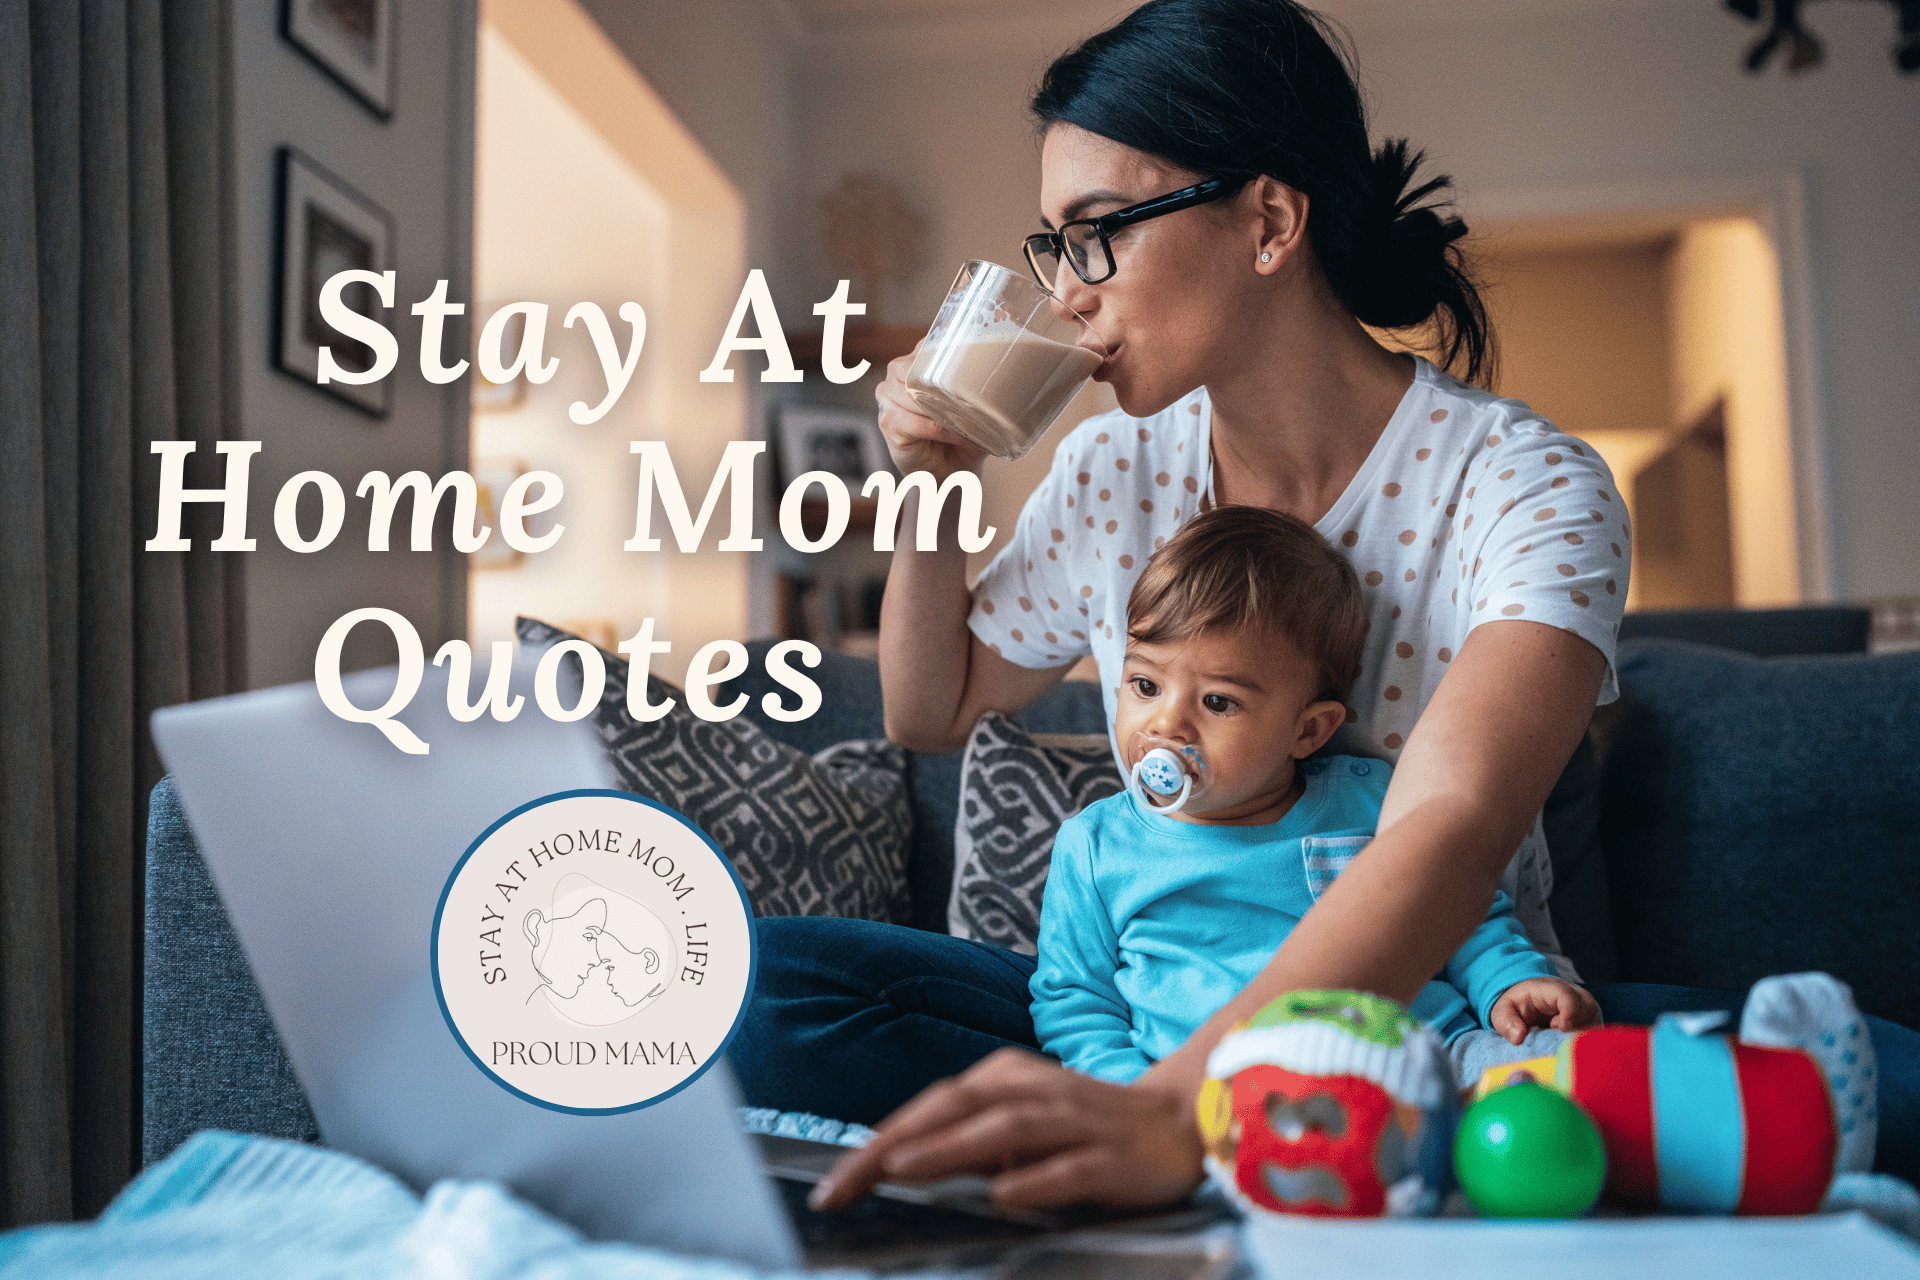 Stay at home mom quotes